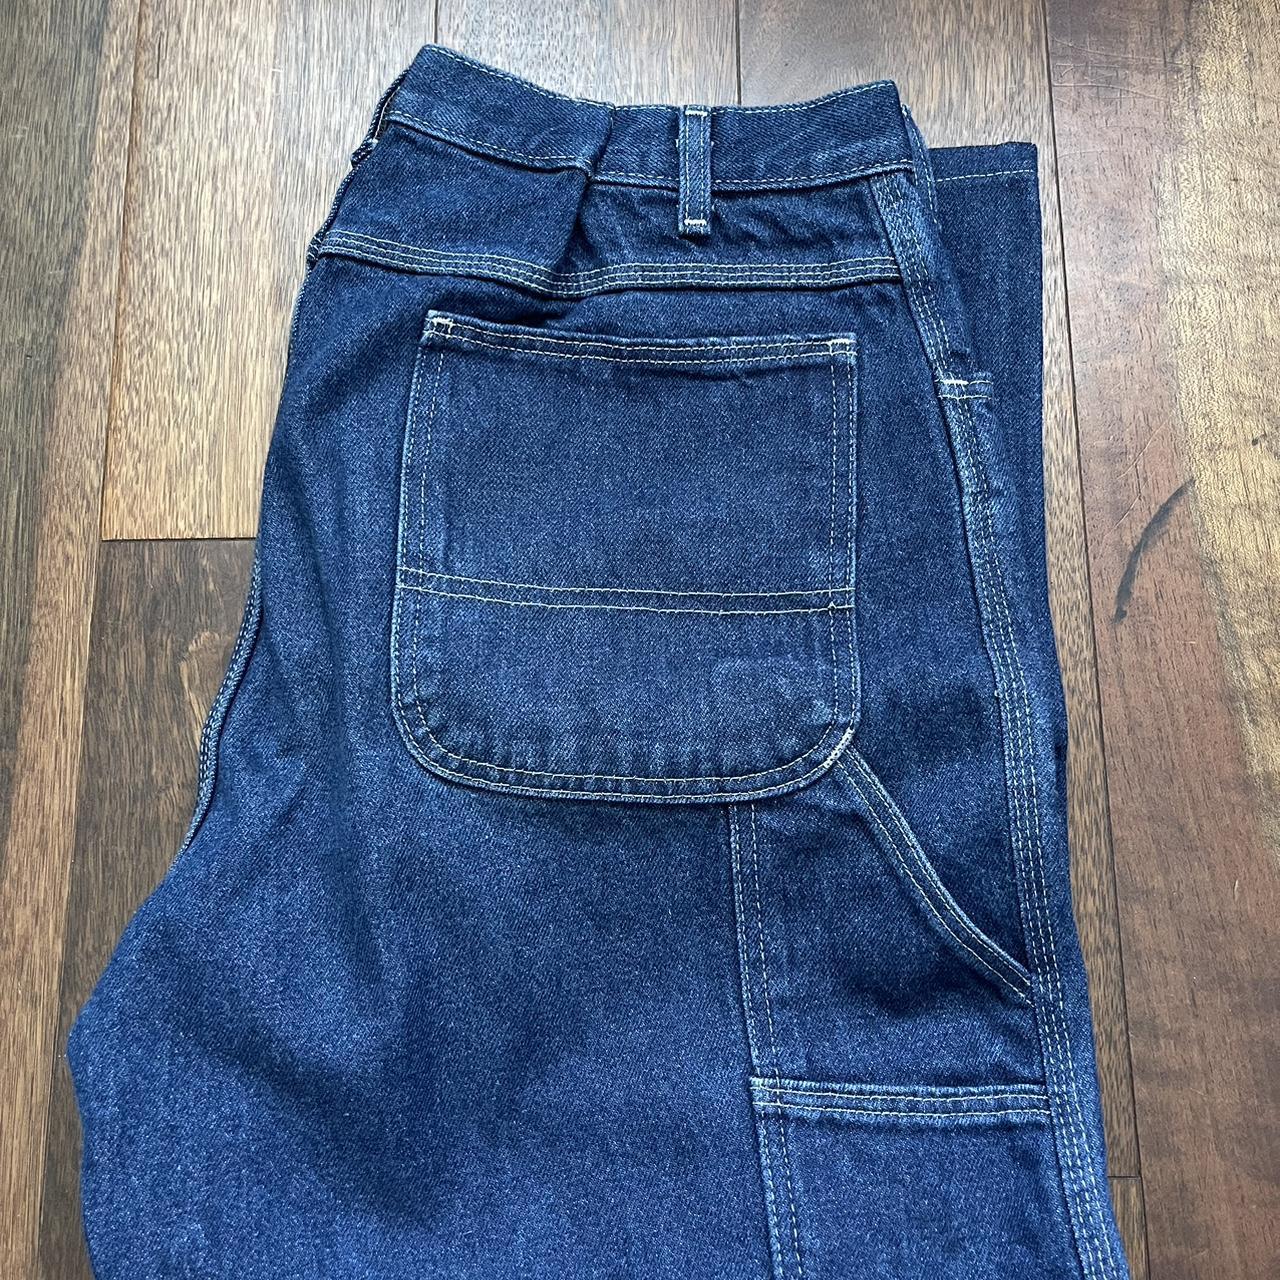 NEW BAGGY JEANS SIZE - 38x30 (waist adjusted to... - Depop